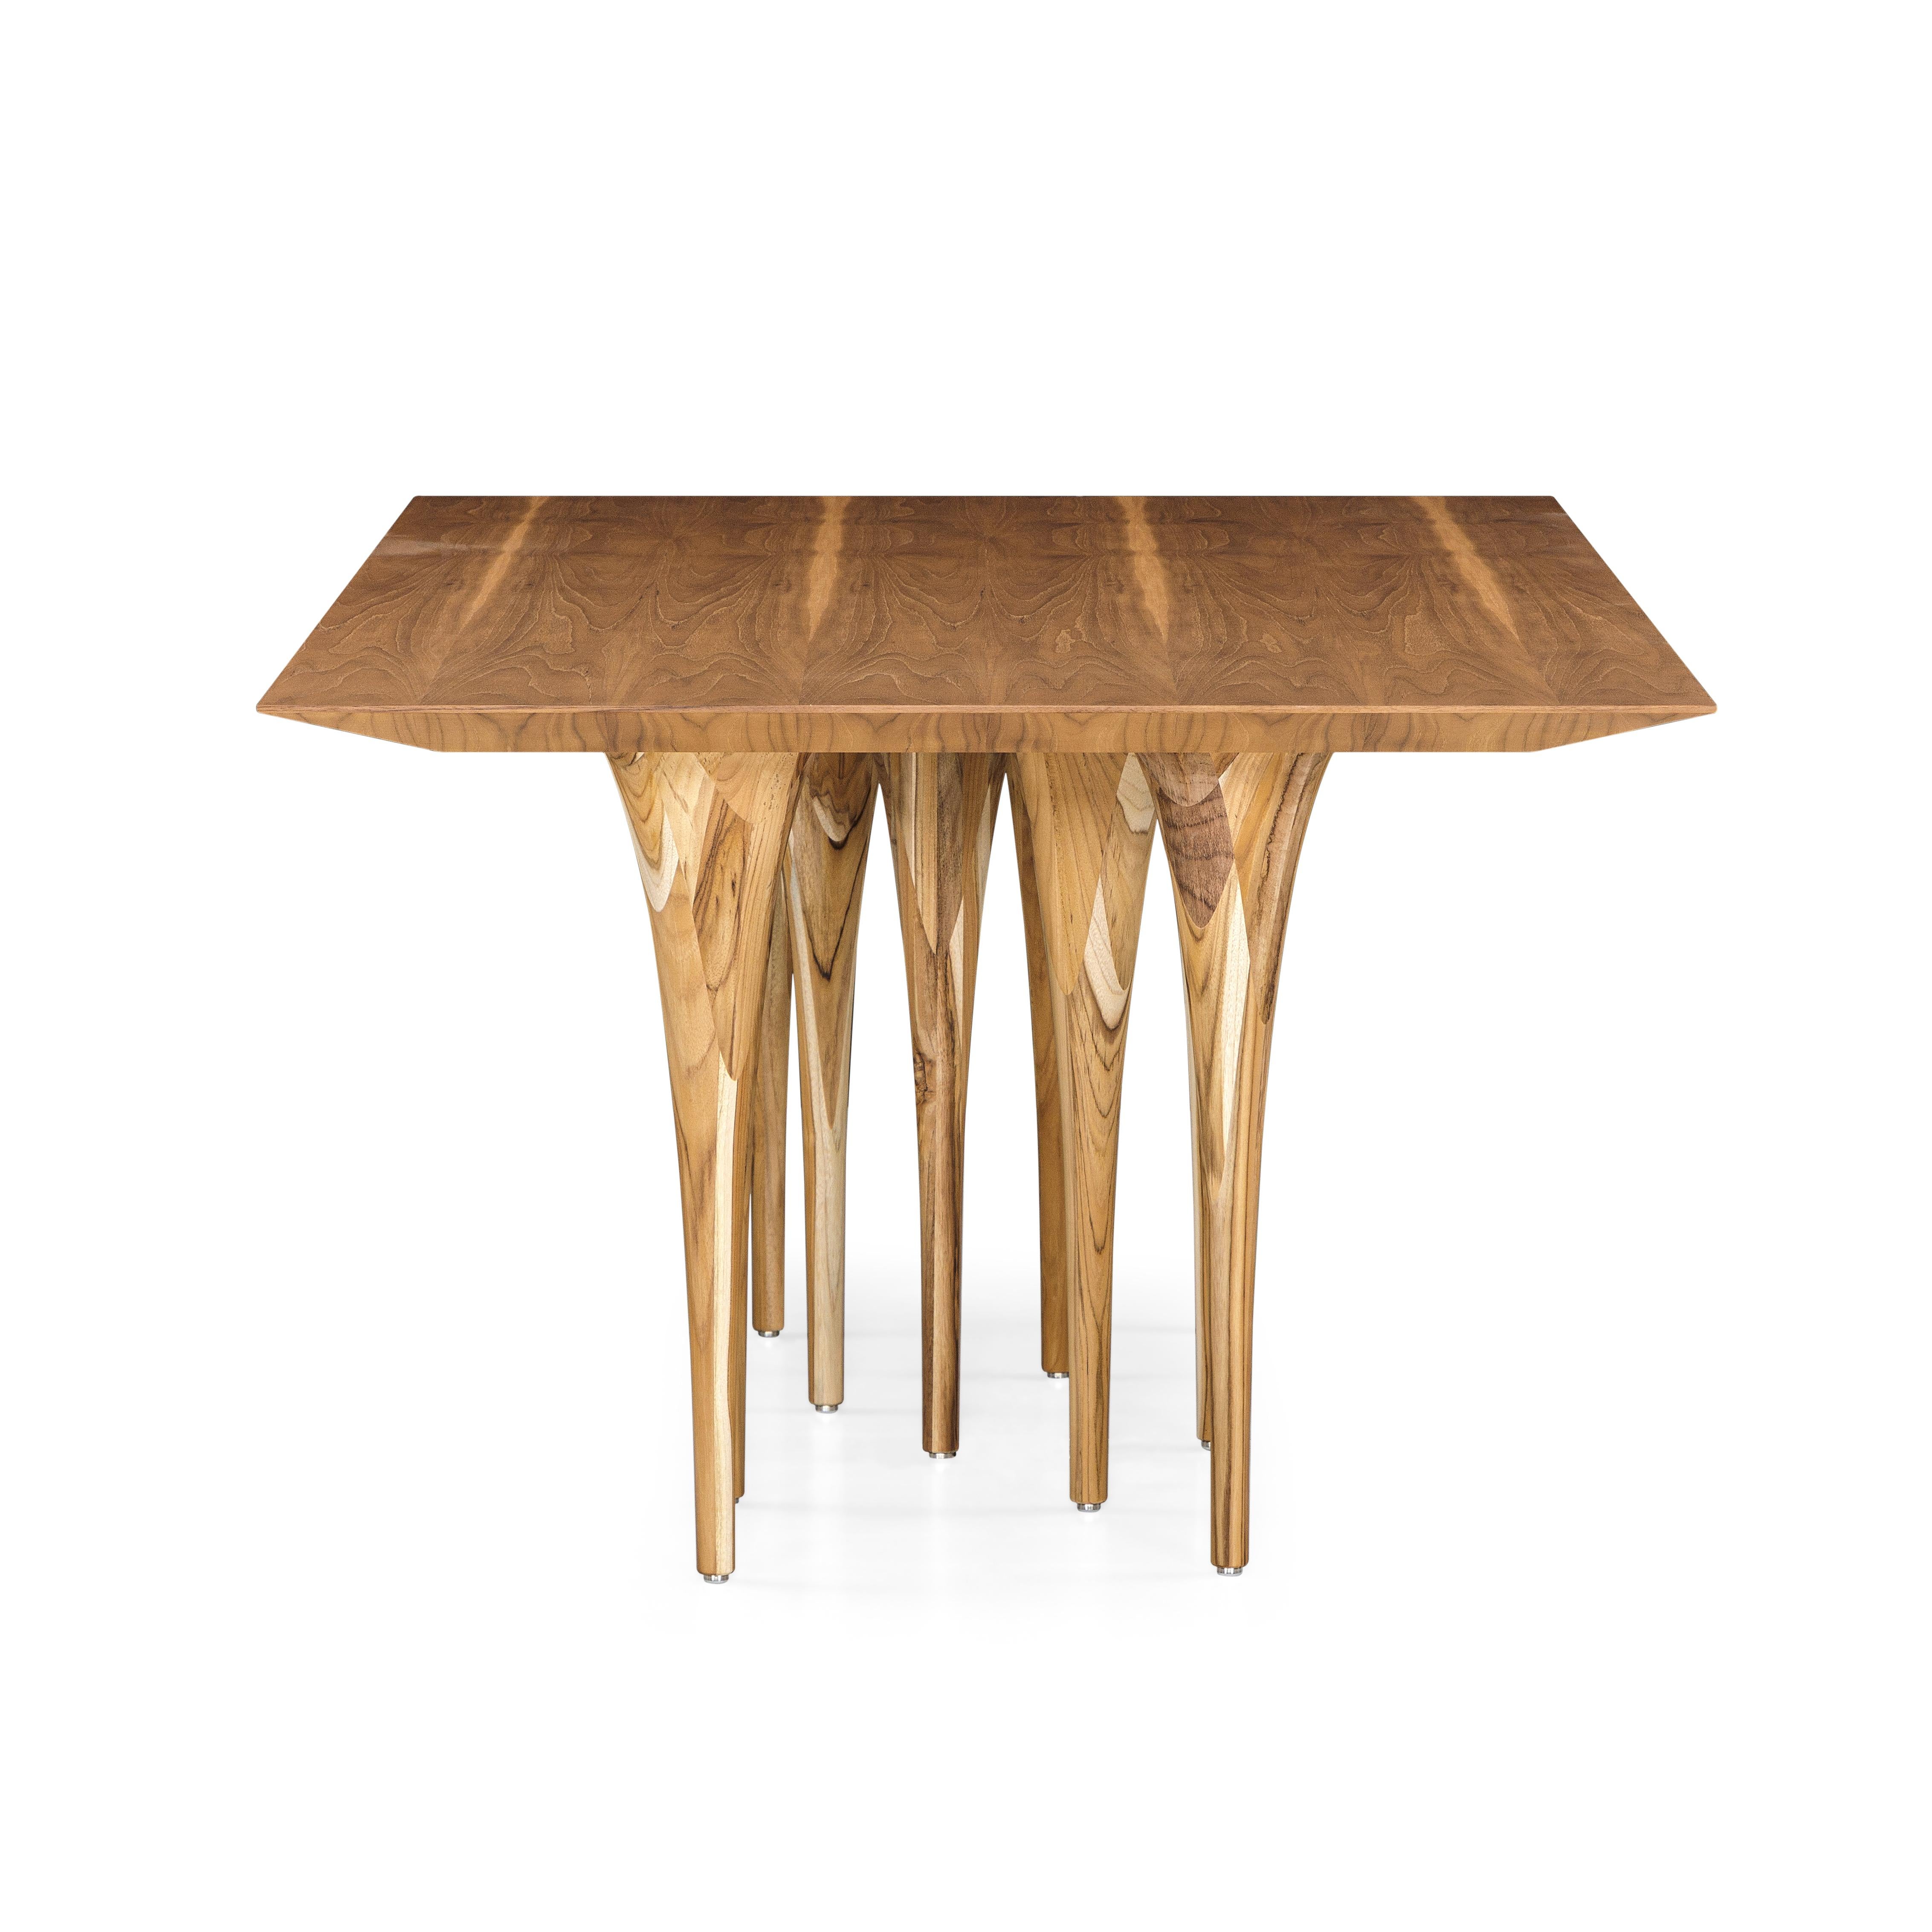 Brazilian Pin Dining Table with a Teak Wood Veneered Table Top and 10 Legs 71'' For Sale